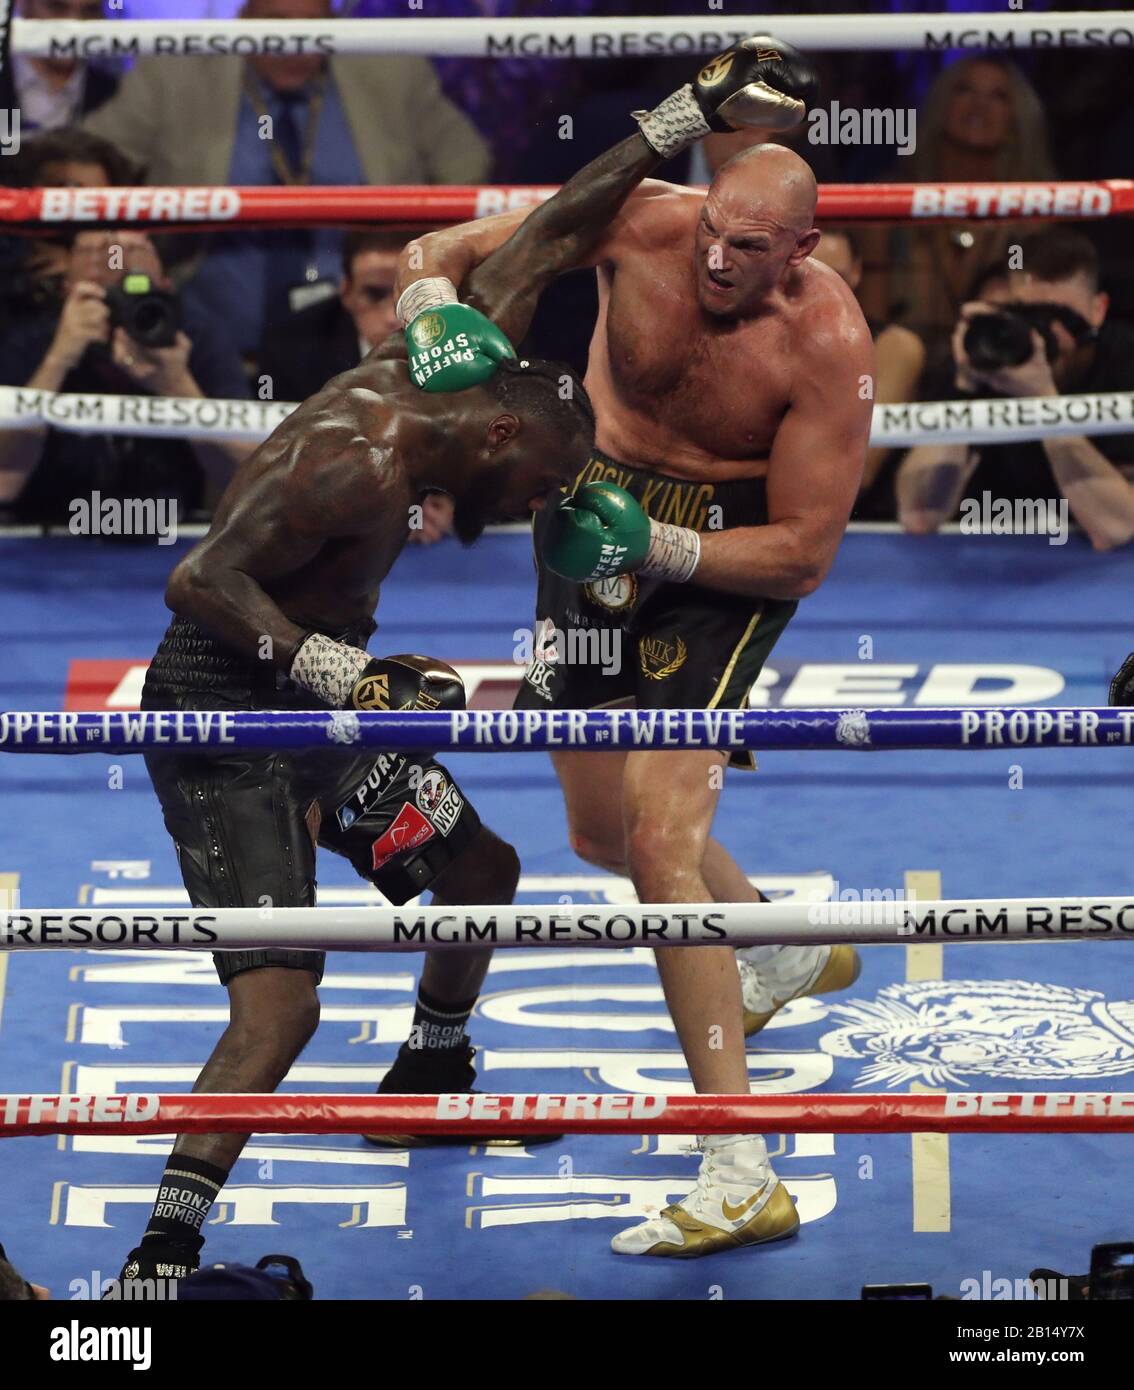 Tyson Fury (right) and Deontay Wilder during the World Boxing Council World Heavy Title bout at the MGM Grand, Las Vegas. Stock Photo